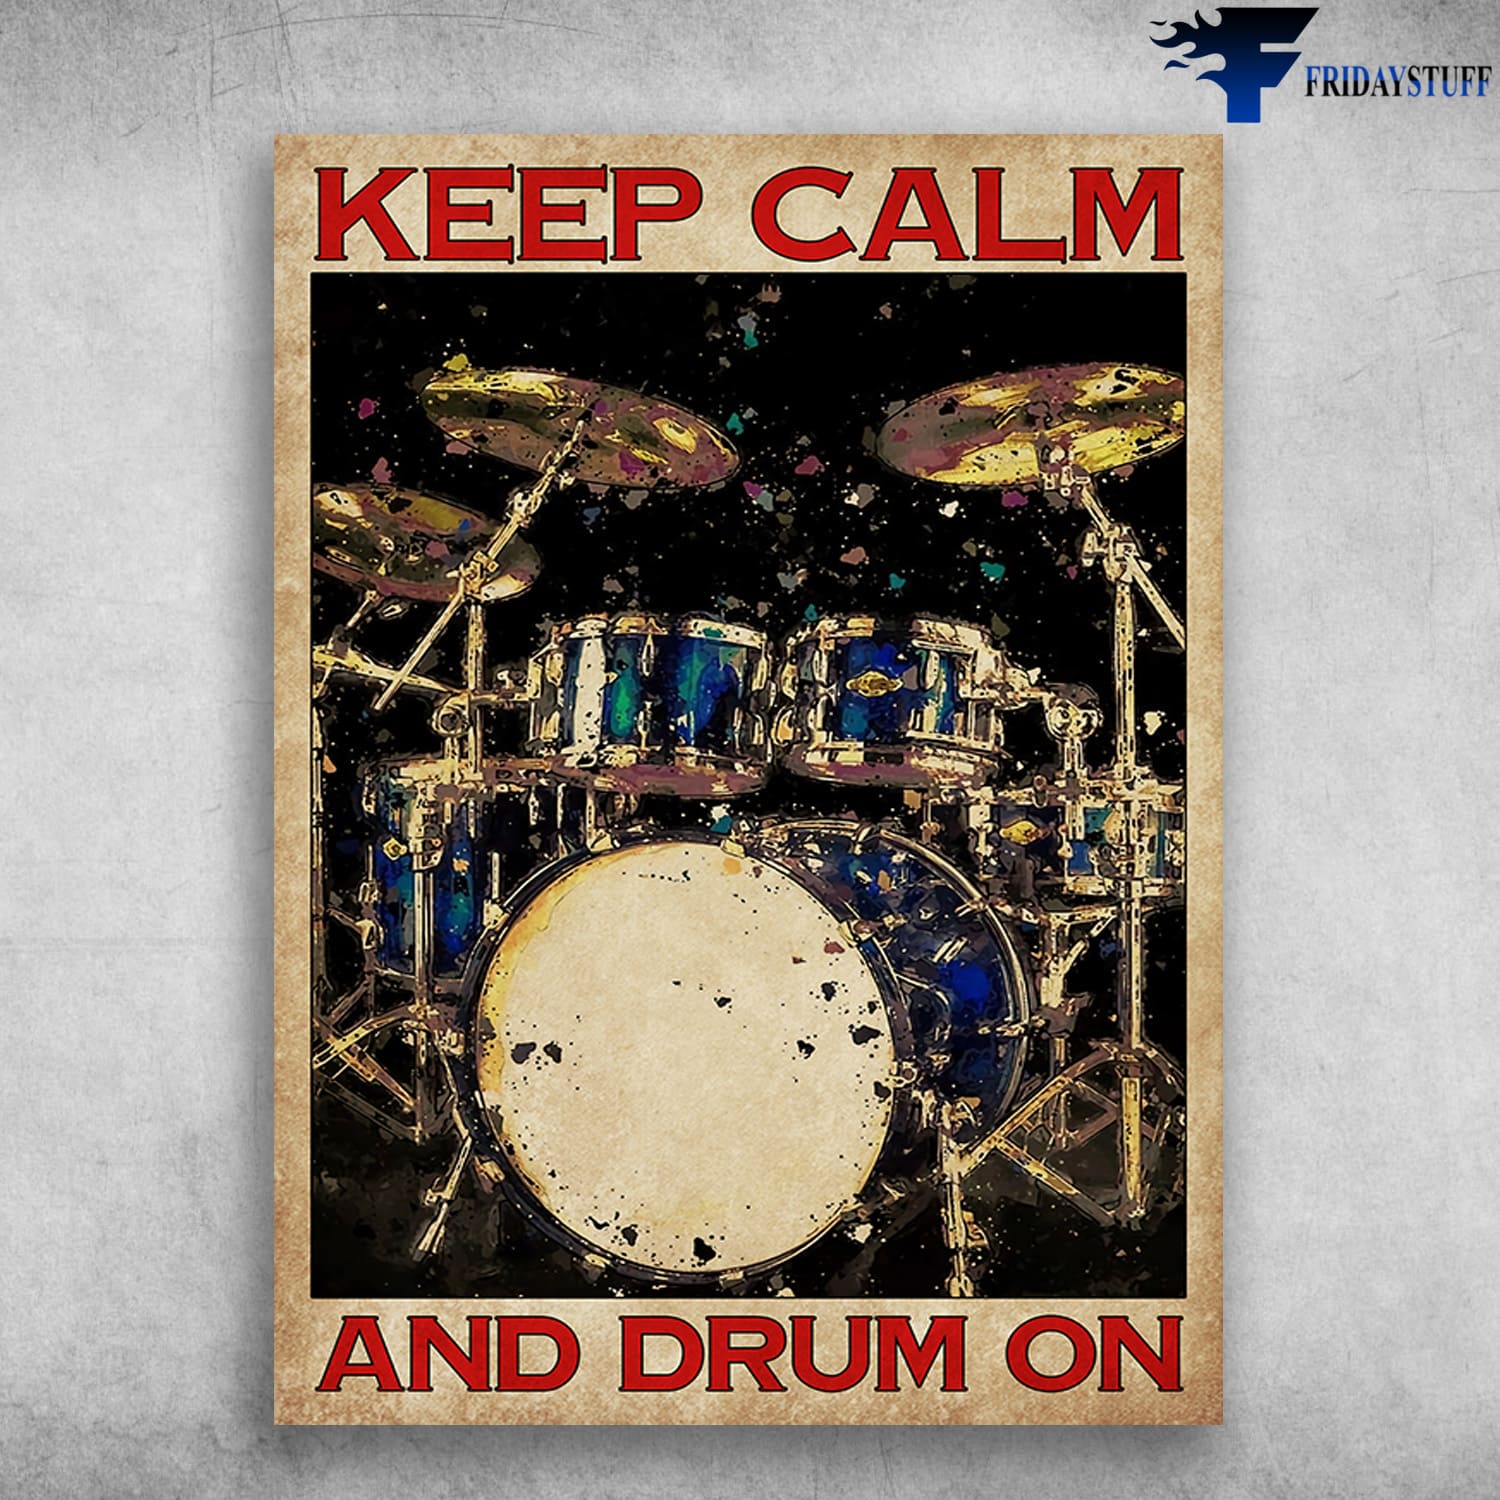 Drummer Poster, Drum Poster, Keep Calm, And Drum On